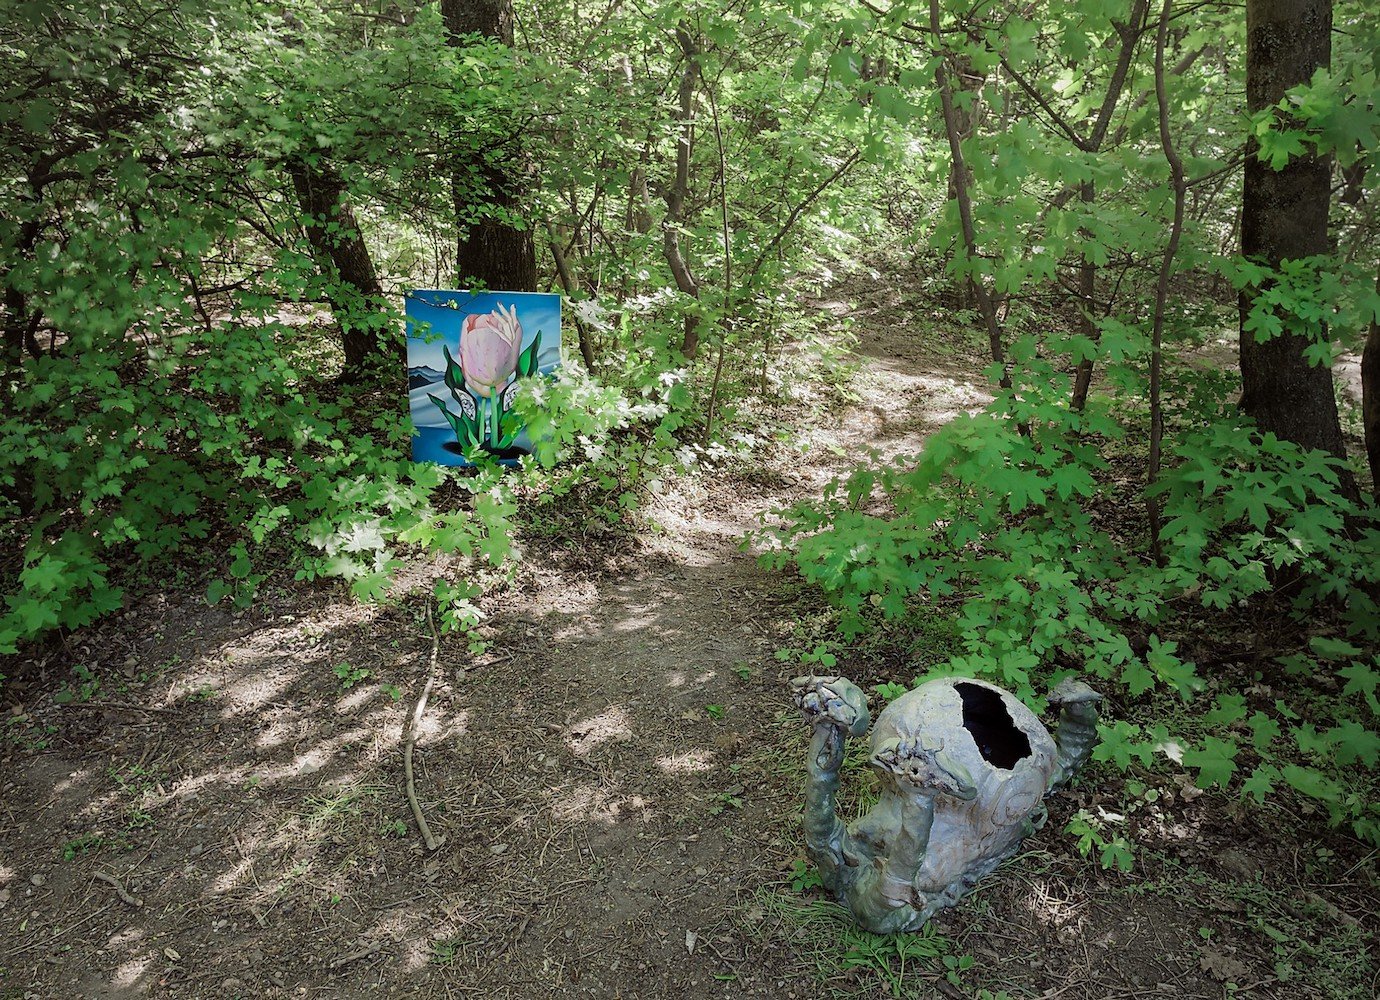 A secret exhibition in the backwoods of Budapest asks how we can heal our connection to nature